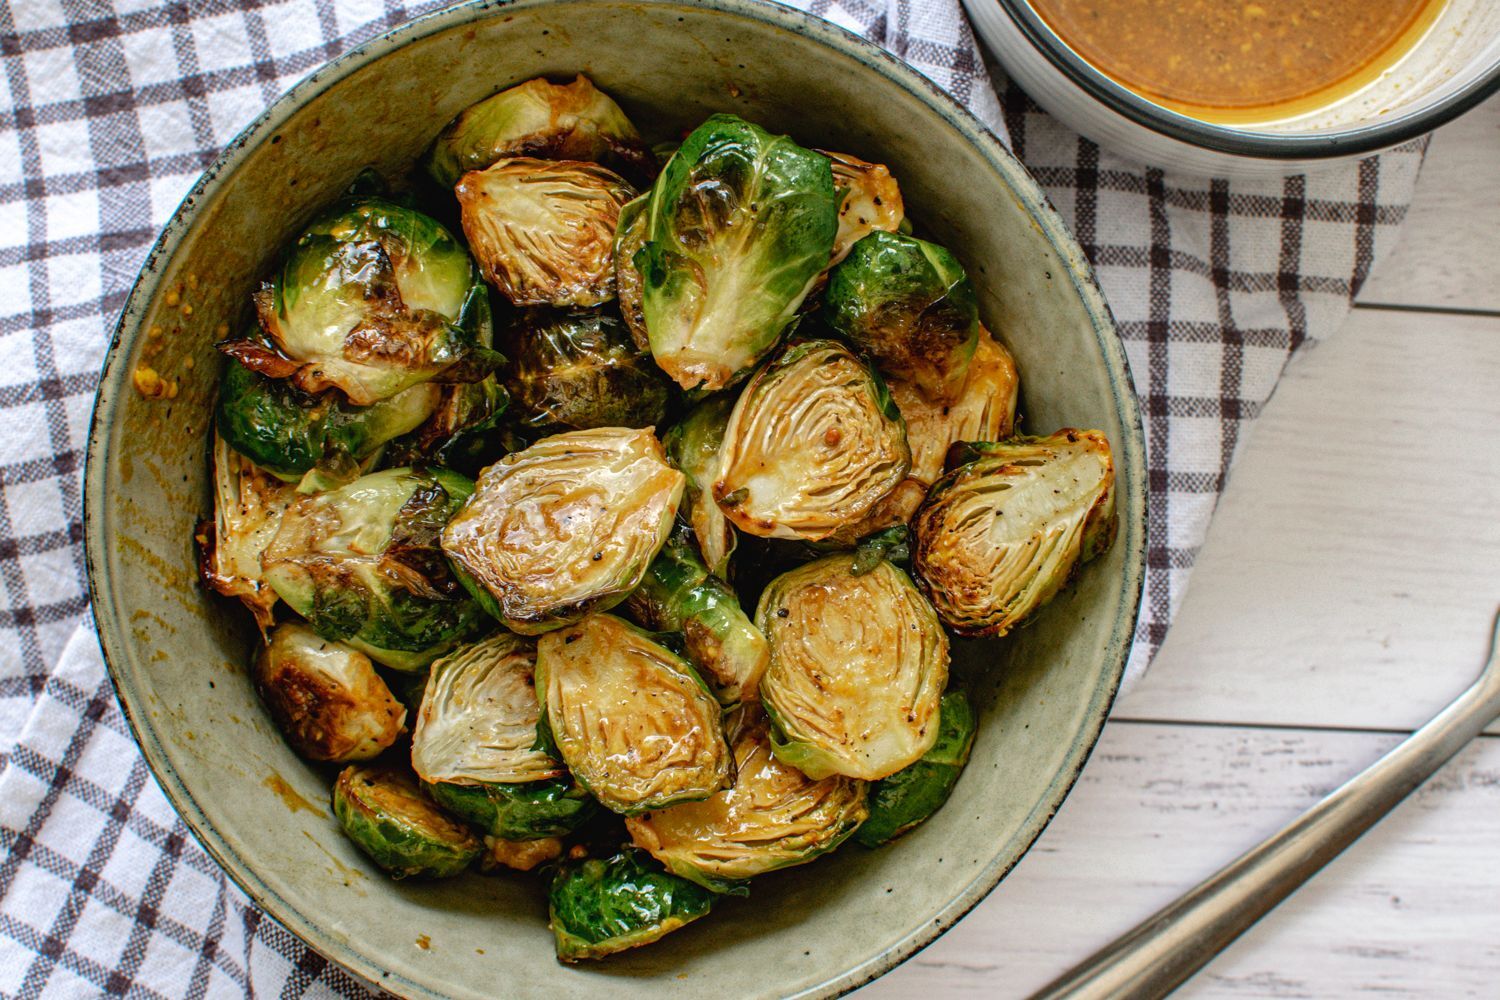 Honey mustard Brussels sprouts in a bowl with the sauce in a small bowl on the side.